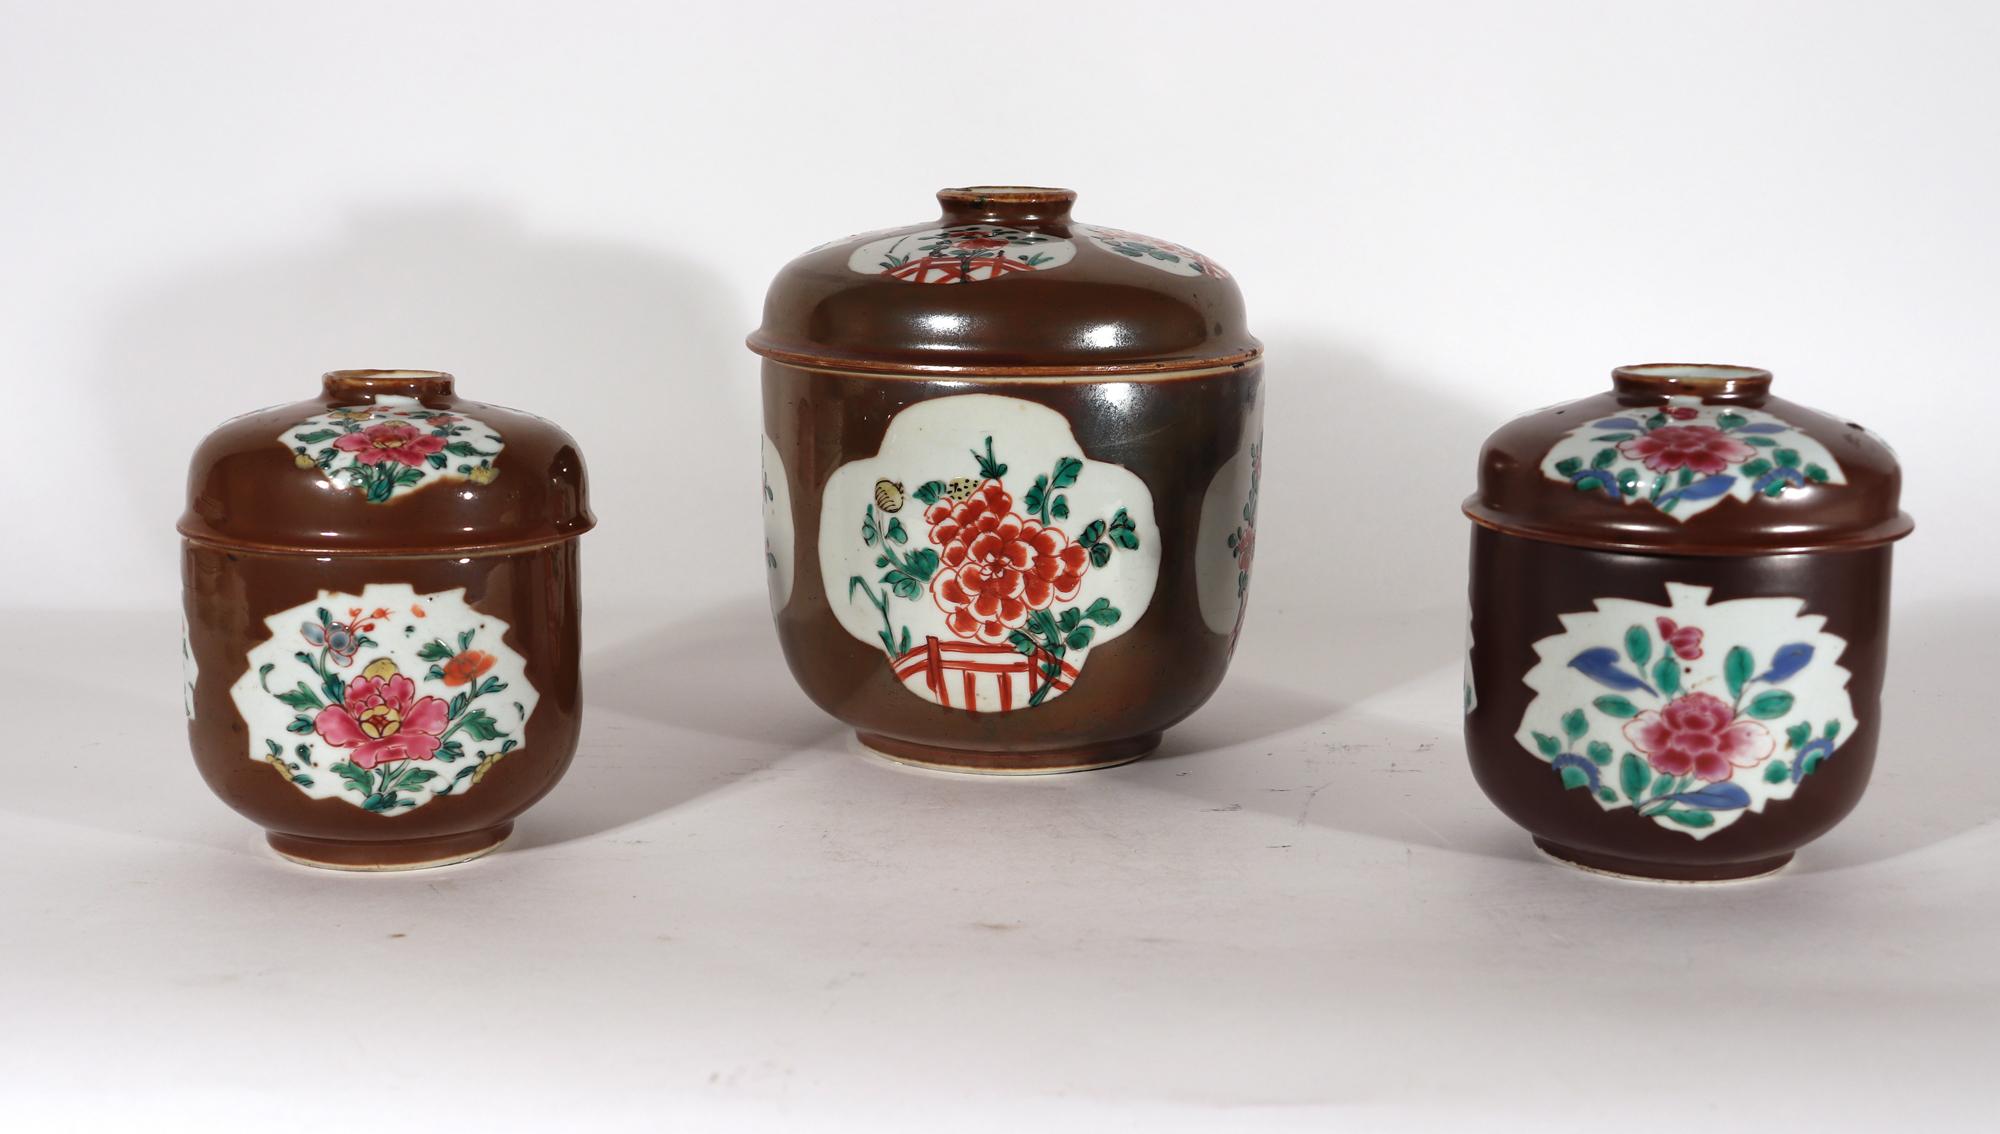 Chinese Export Porcelain Group of Five Famille rose & Batavia-ware Chocolate-colored Urns & Covers
1750s

The  Chinese Export porcelain circular jards and covers are painted with a chocolate Batavia-ware ground with leaf-shaped panels of famille